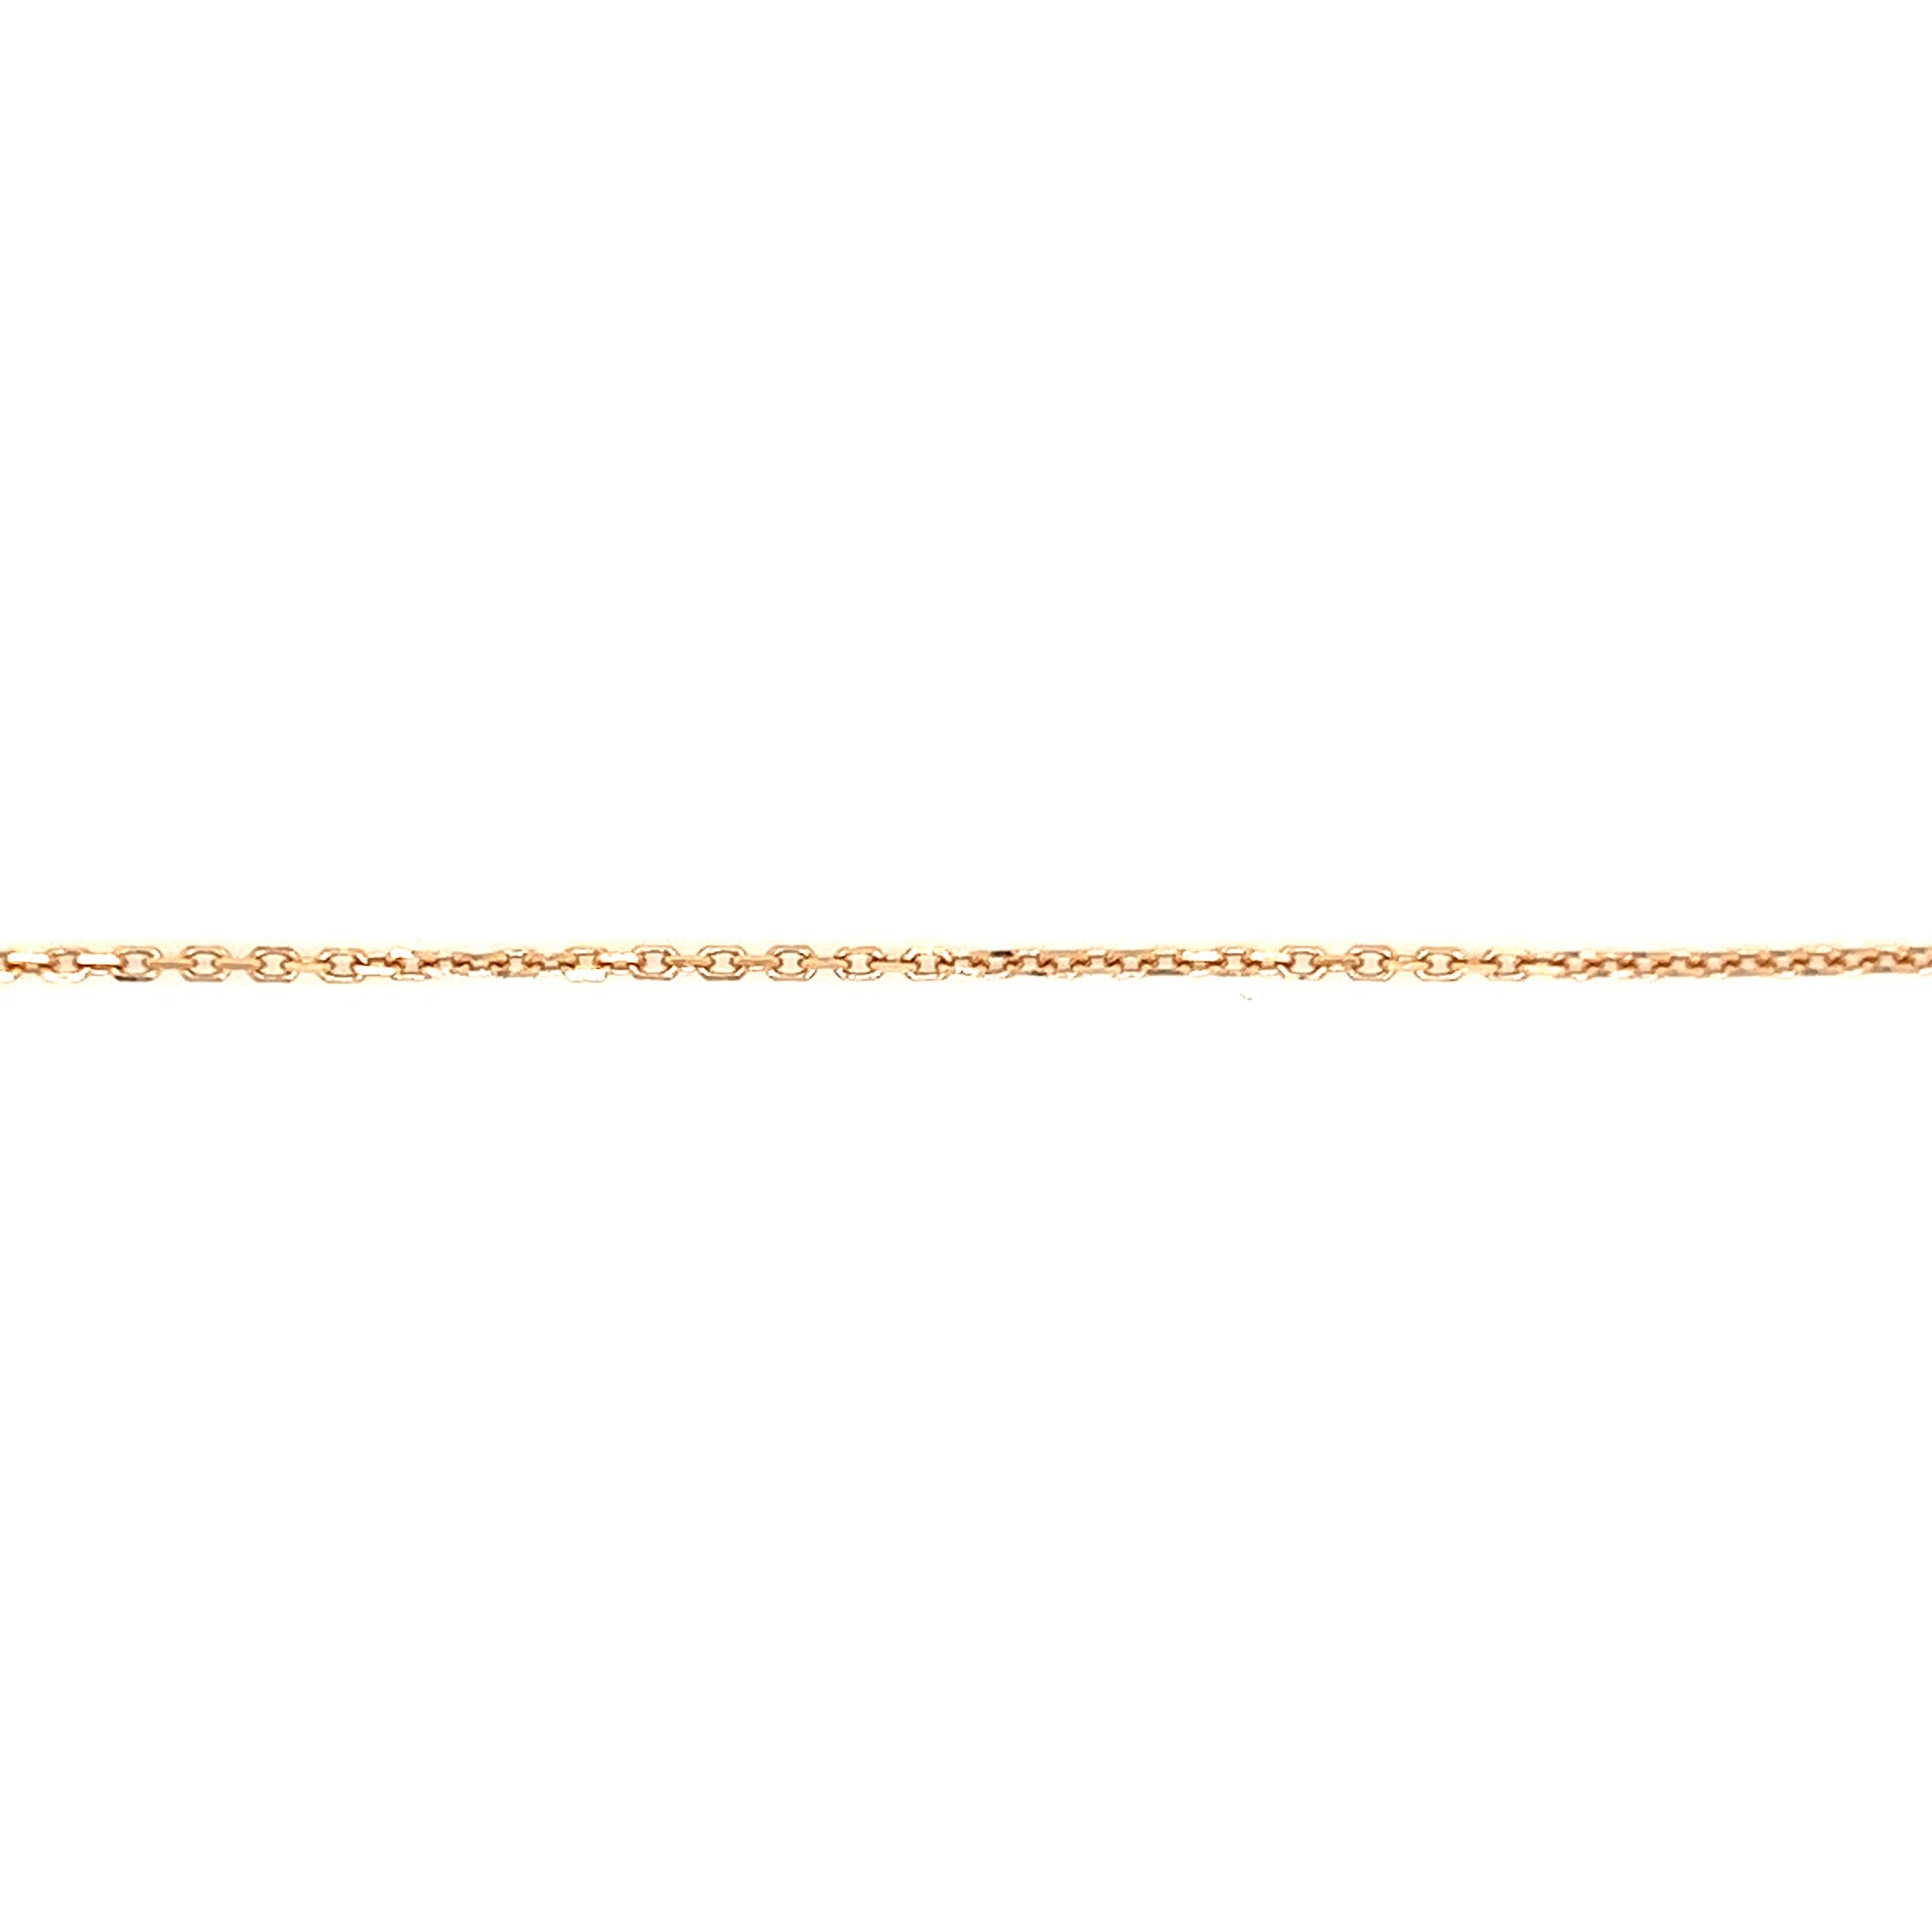 Cable Chain 1.15mm with 24in of Length in 14K Rose Gold Chain View